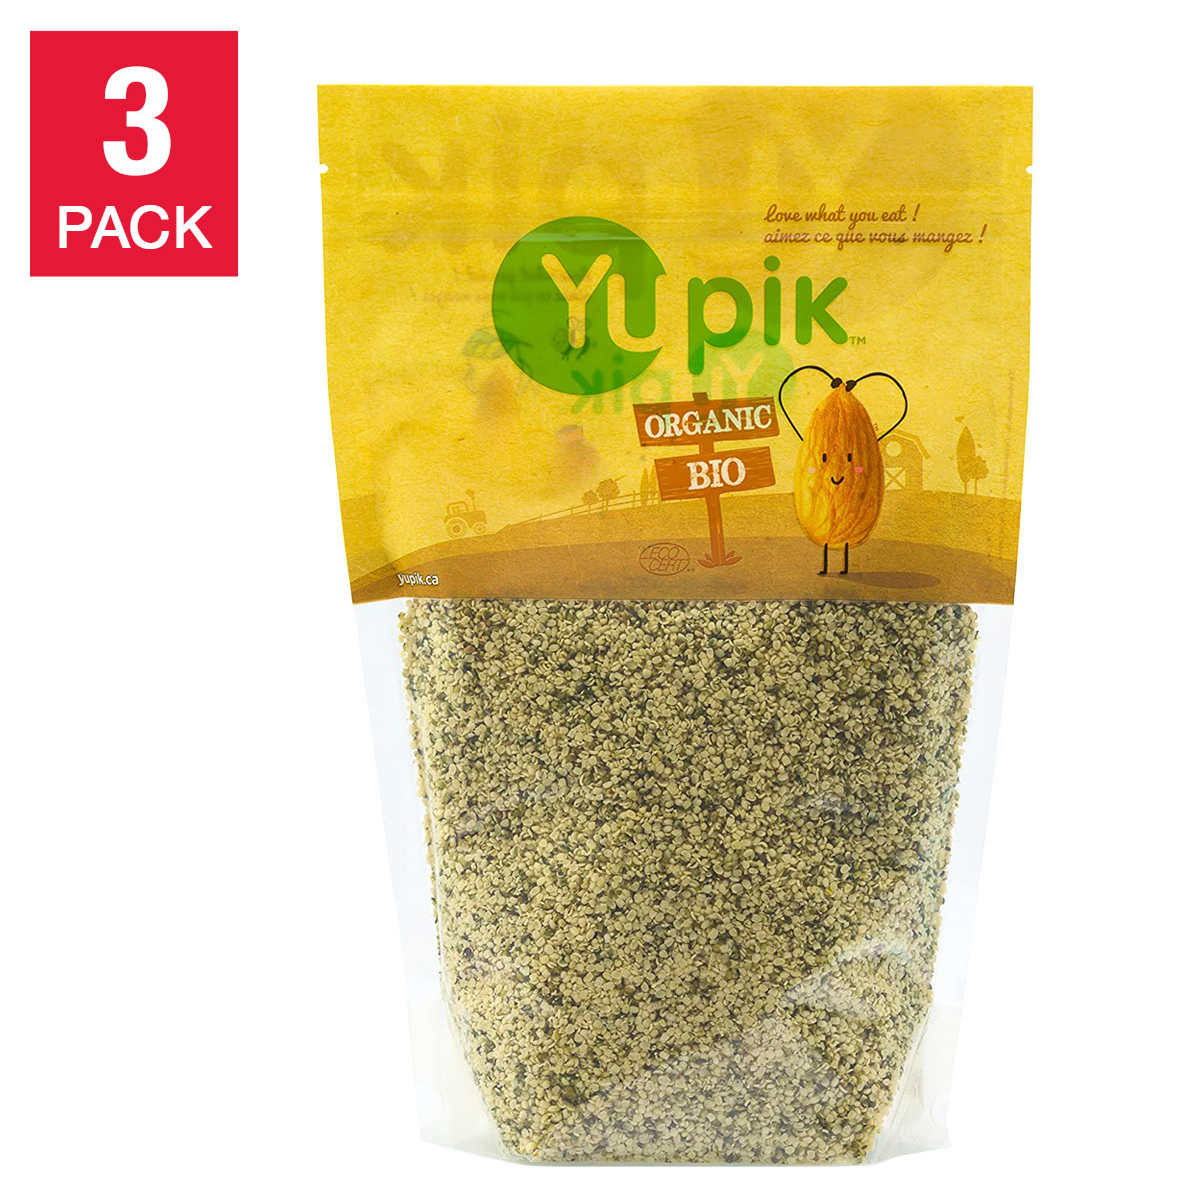 Buy Yupik Organic Black Chia Seeds with same day delivery at MarchesTAU